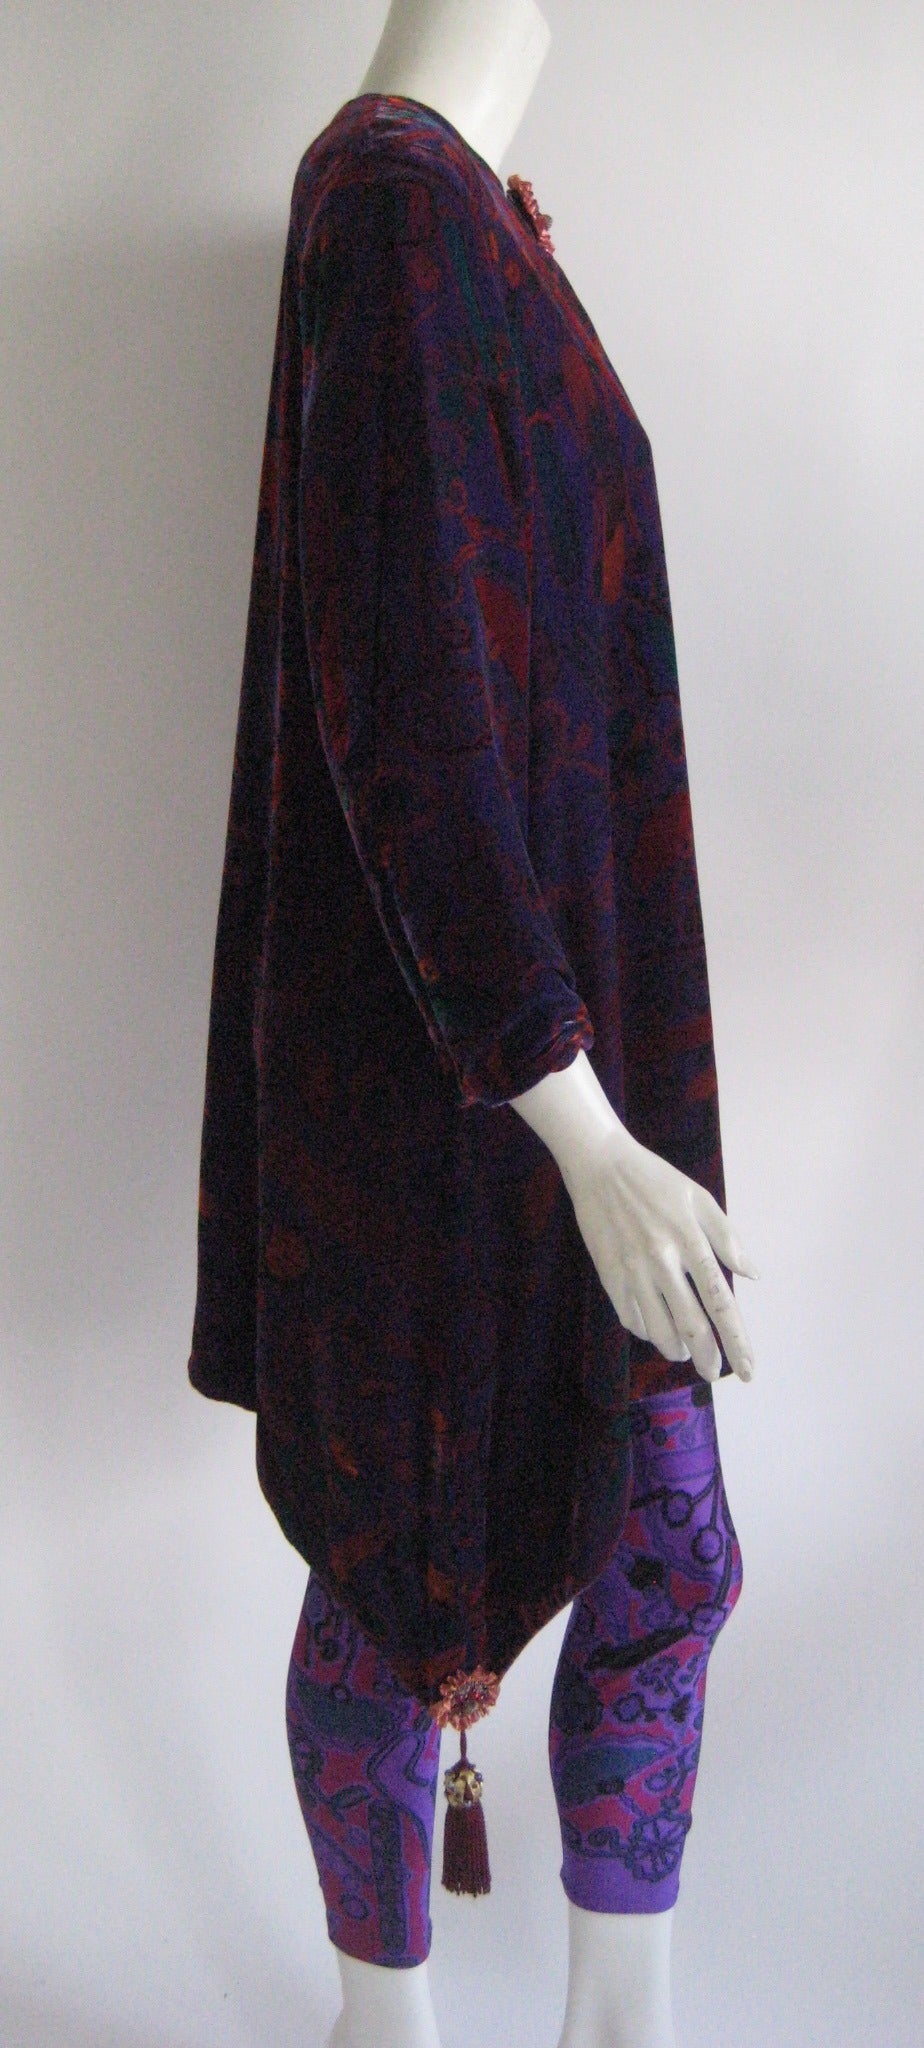 From the Ebony Fashion Fair Runway Archive comes this fabulous Zandra Rhodes velvet tunic with matching leggings .The rayon silk velvet tunic zips up the back and it is fully lined in a dull purple rayon .It has a medallion at the neckline and two